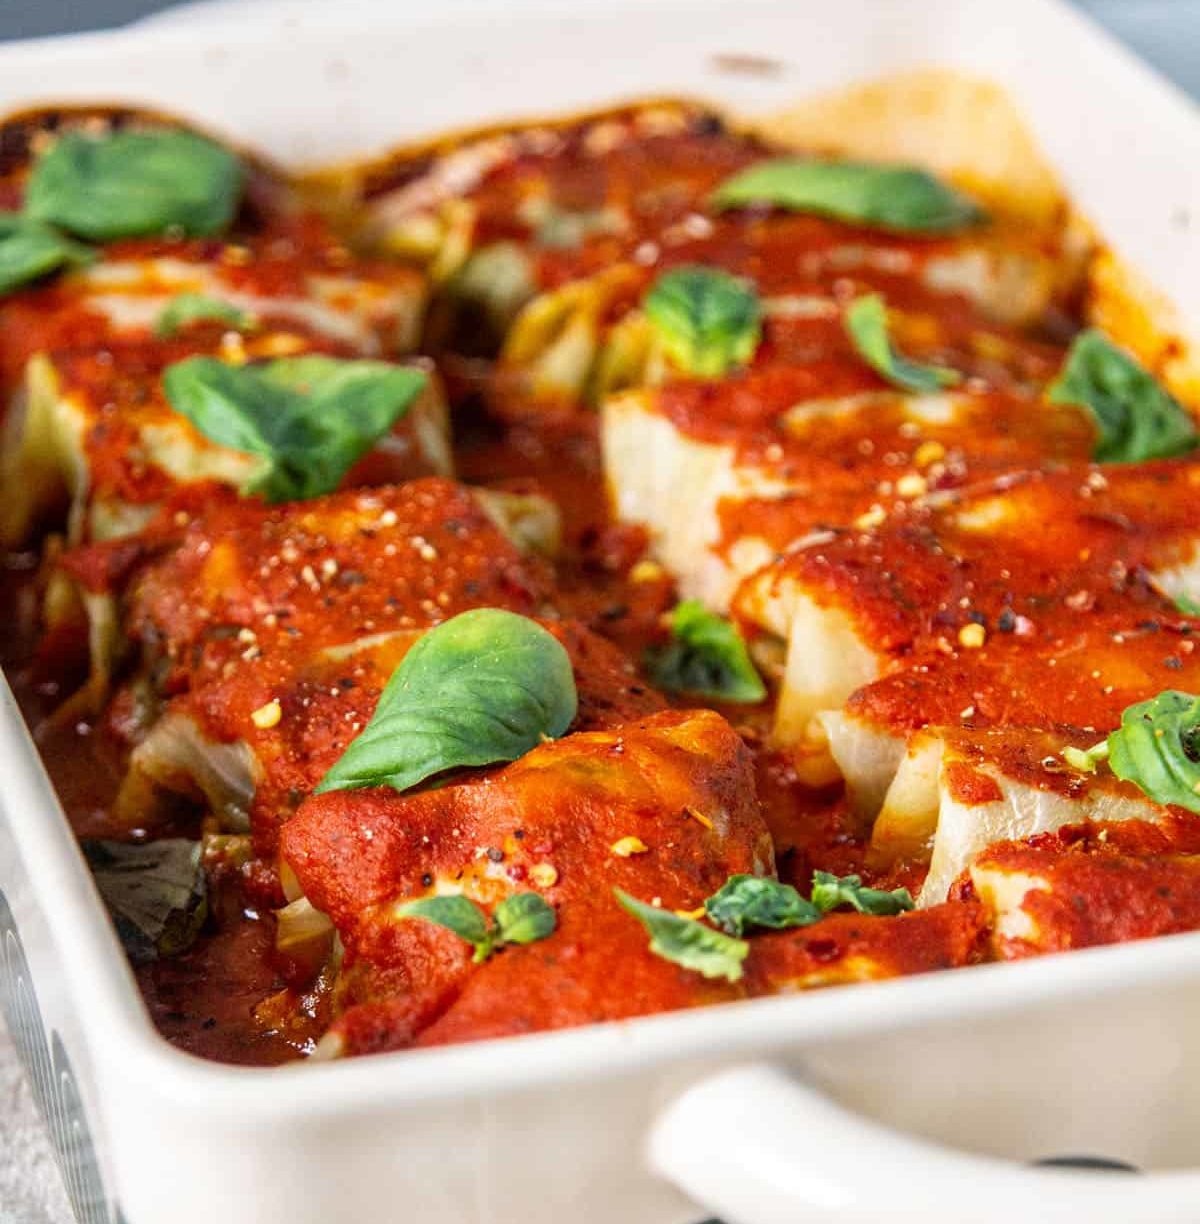 Cabbage rolls fresh from the oven with basil leaves.